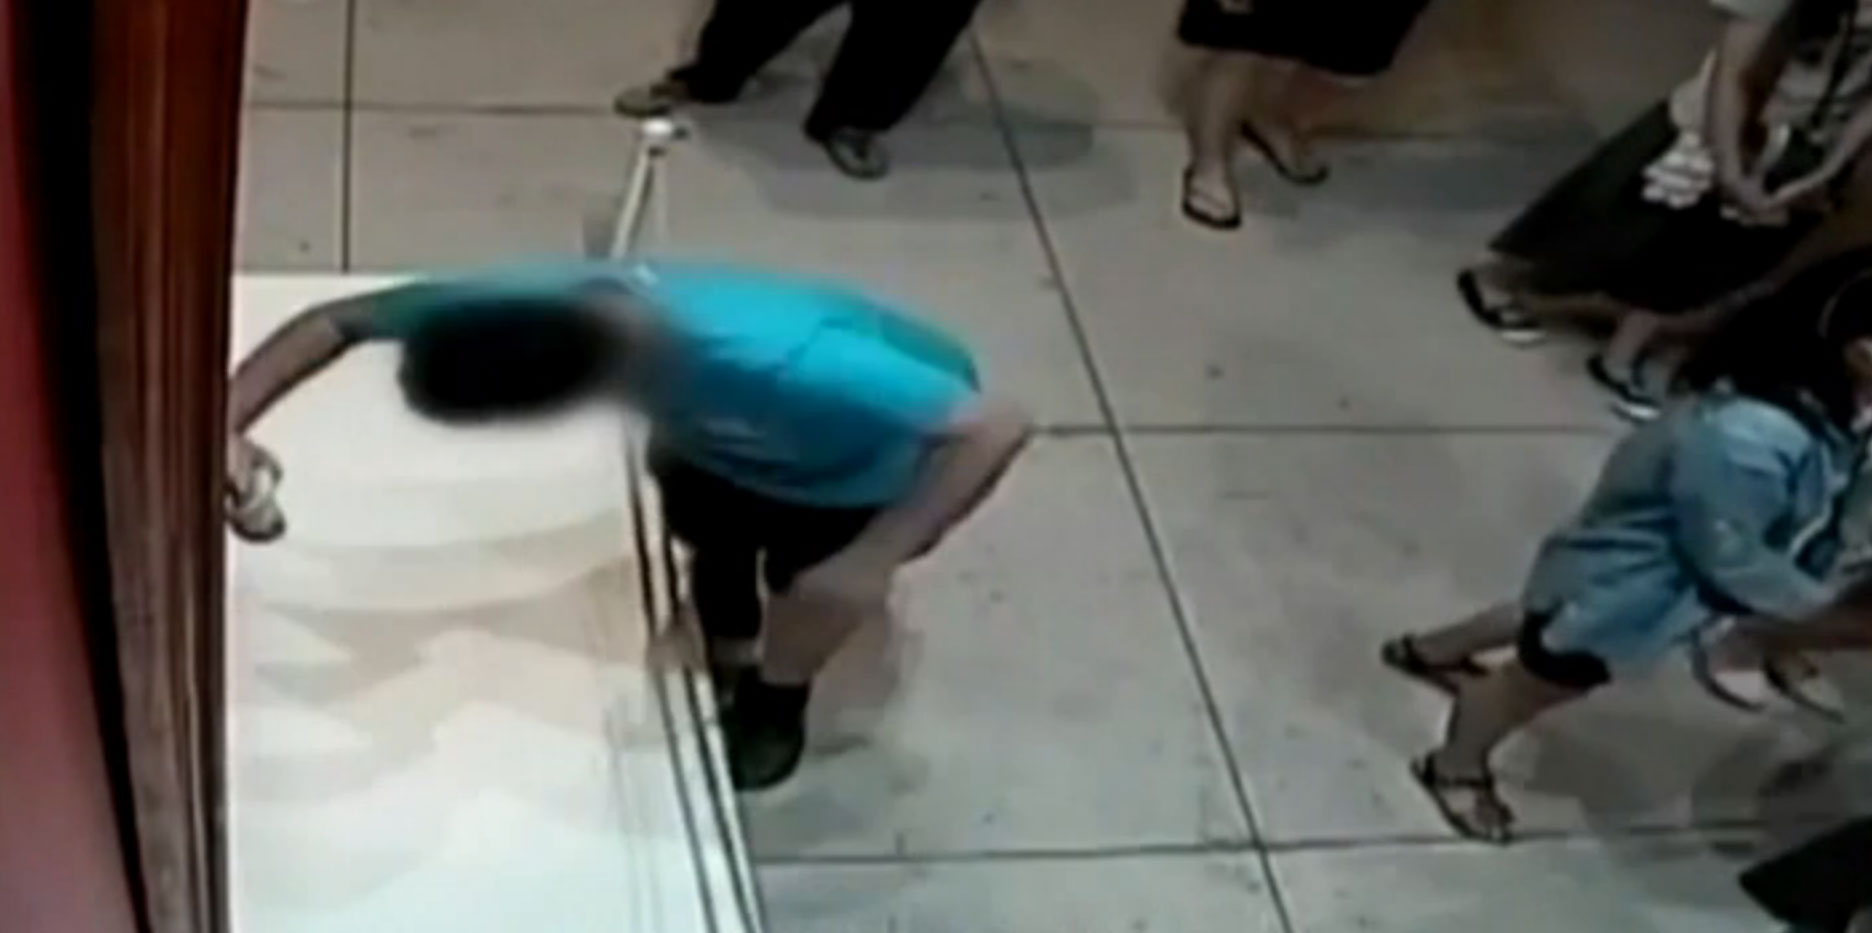 Boy, 12, punches hole in 350-year-old painting (Video)